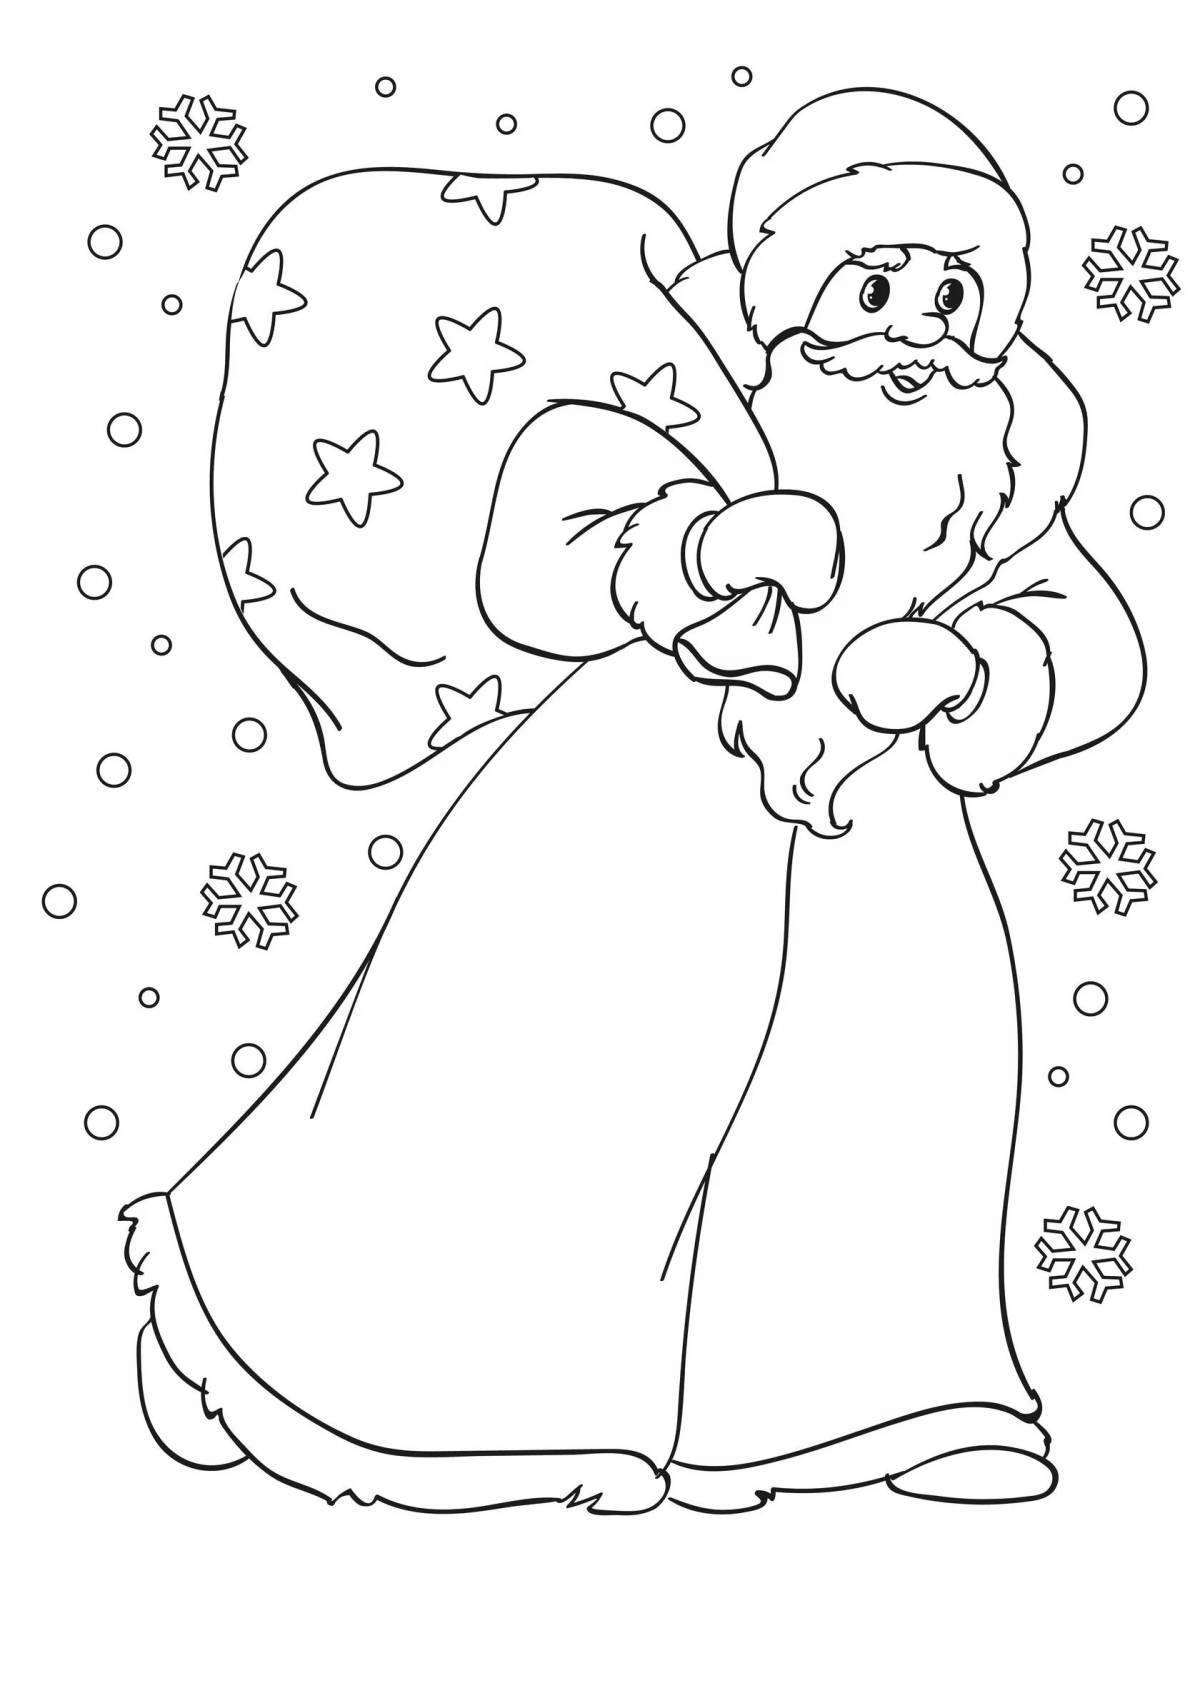 Bright coloring pages of Santa Claus and the Snow Maiden